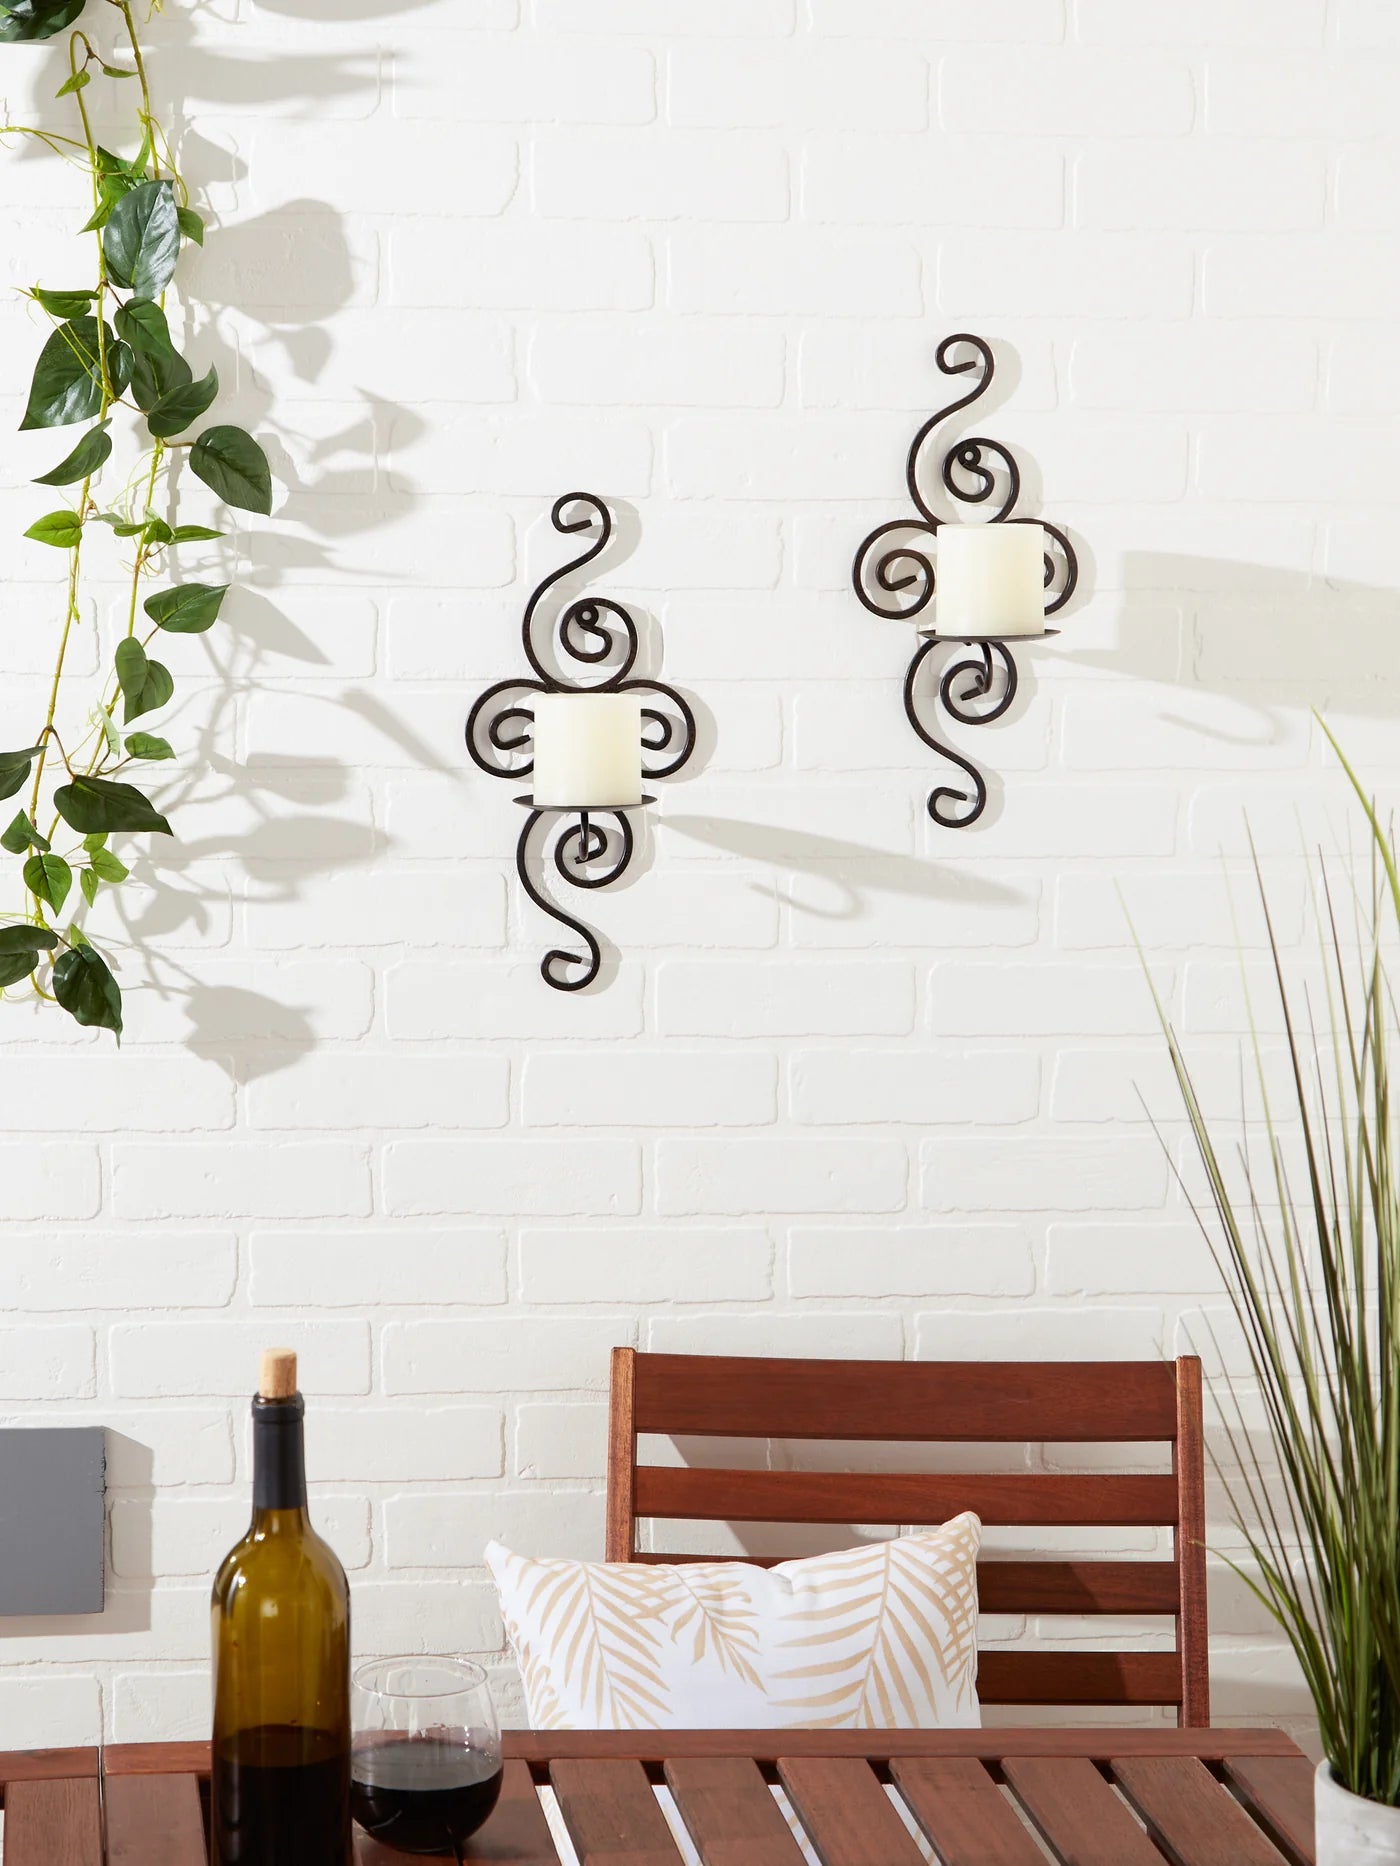 Scrollwork Candle Sconce